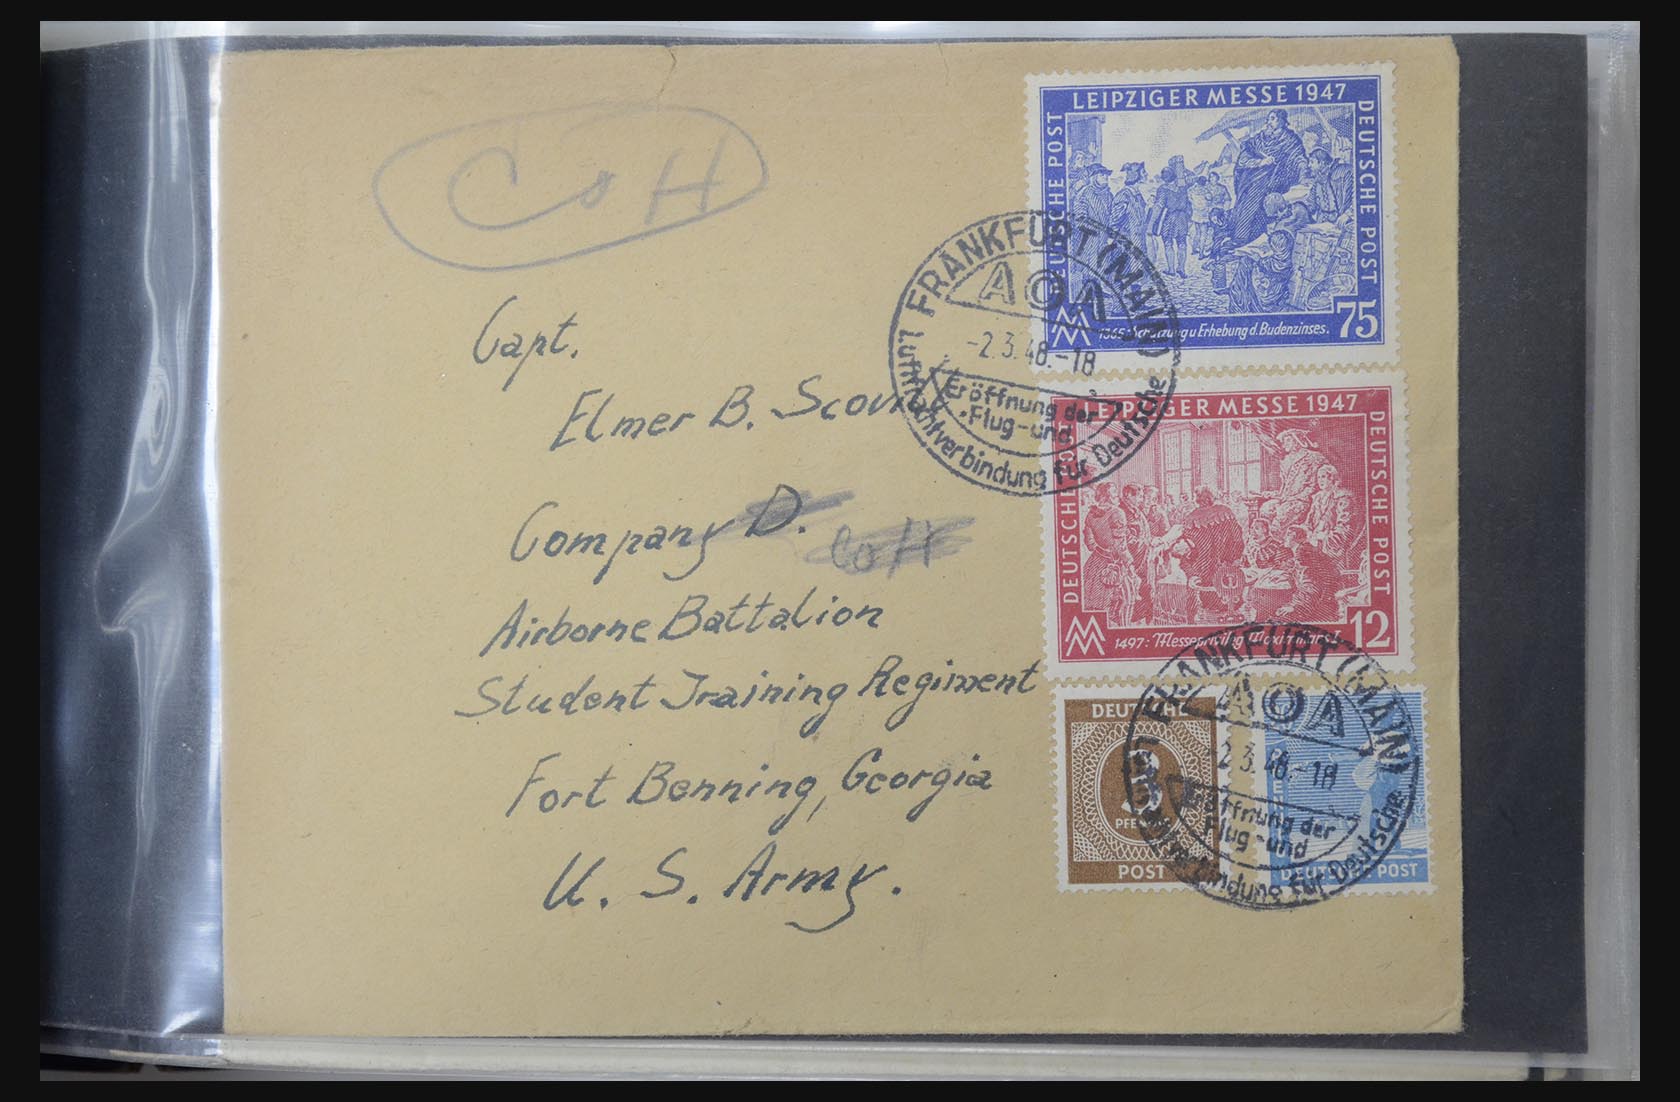 31581 053 - 31581 Germany covers and FDC's 1945-1981.